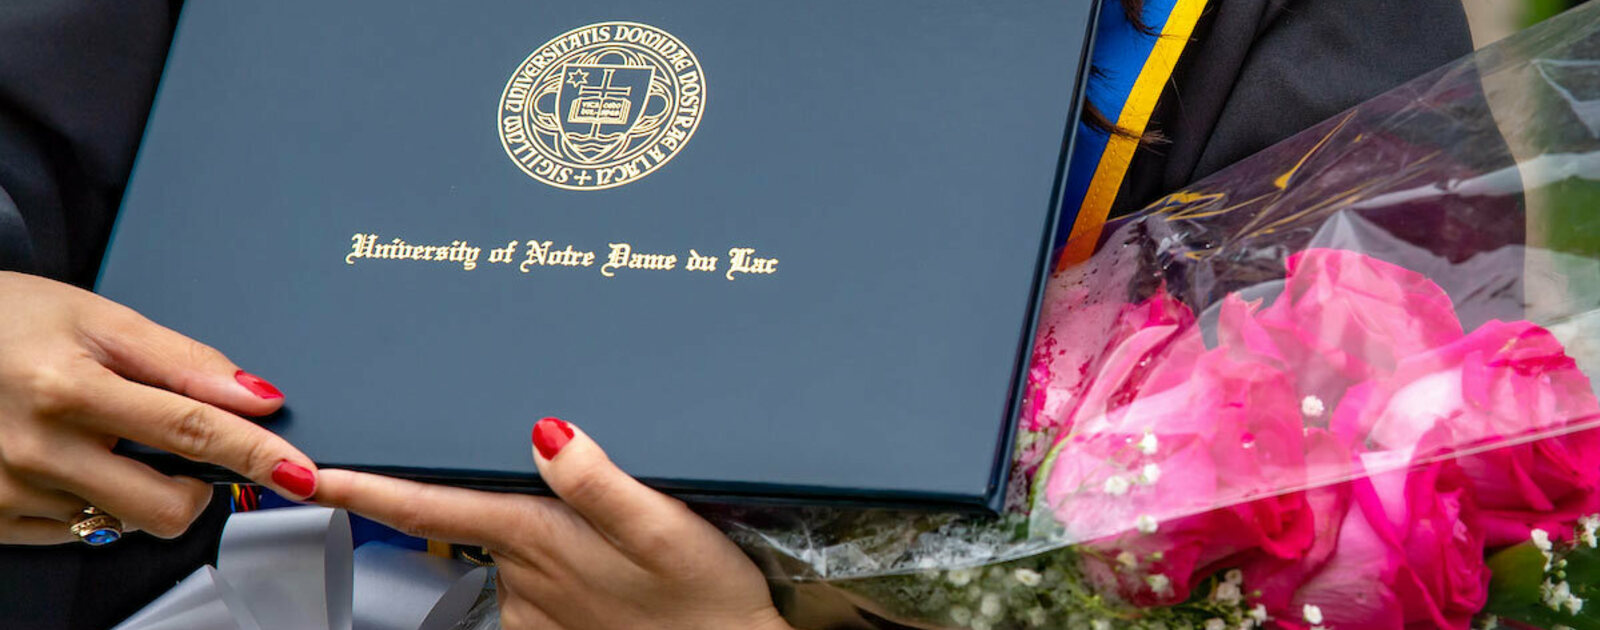 Notre Dame commencement ceremony moved to Joyce Center at 8 a.m. News